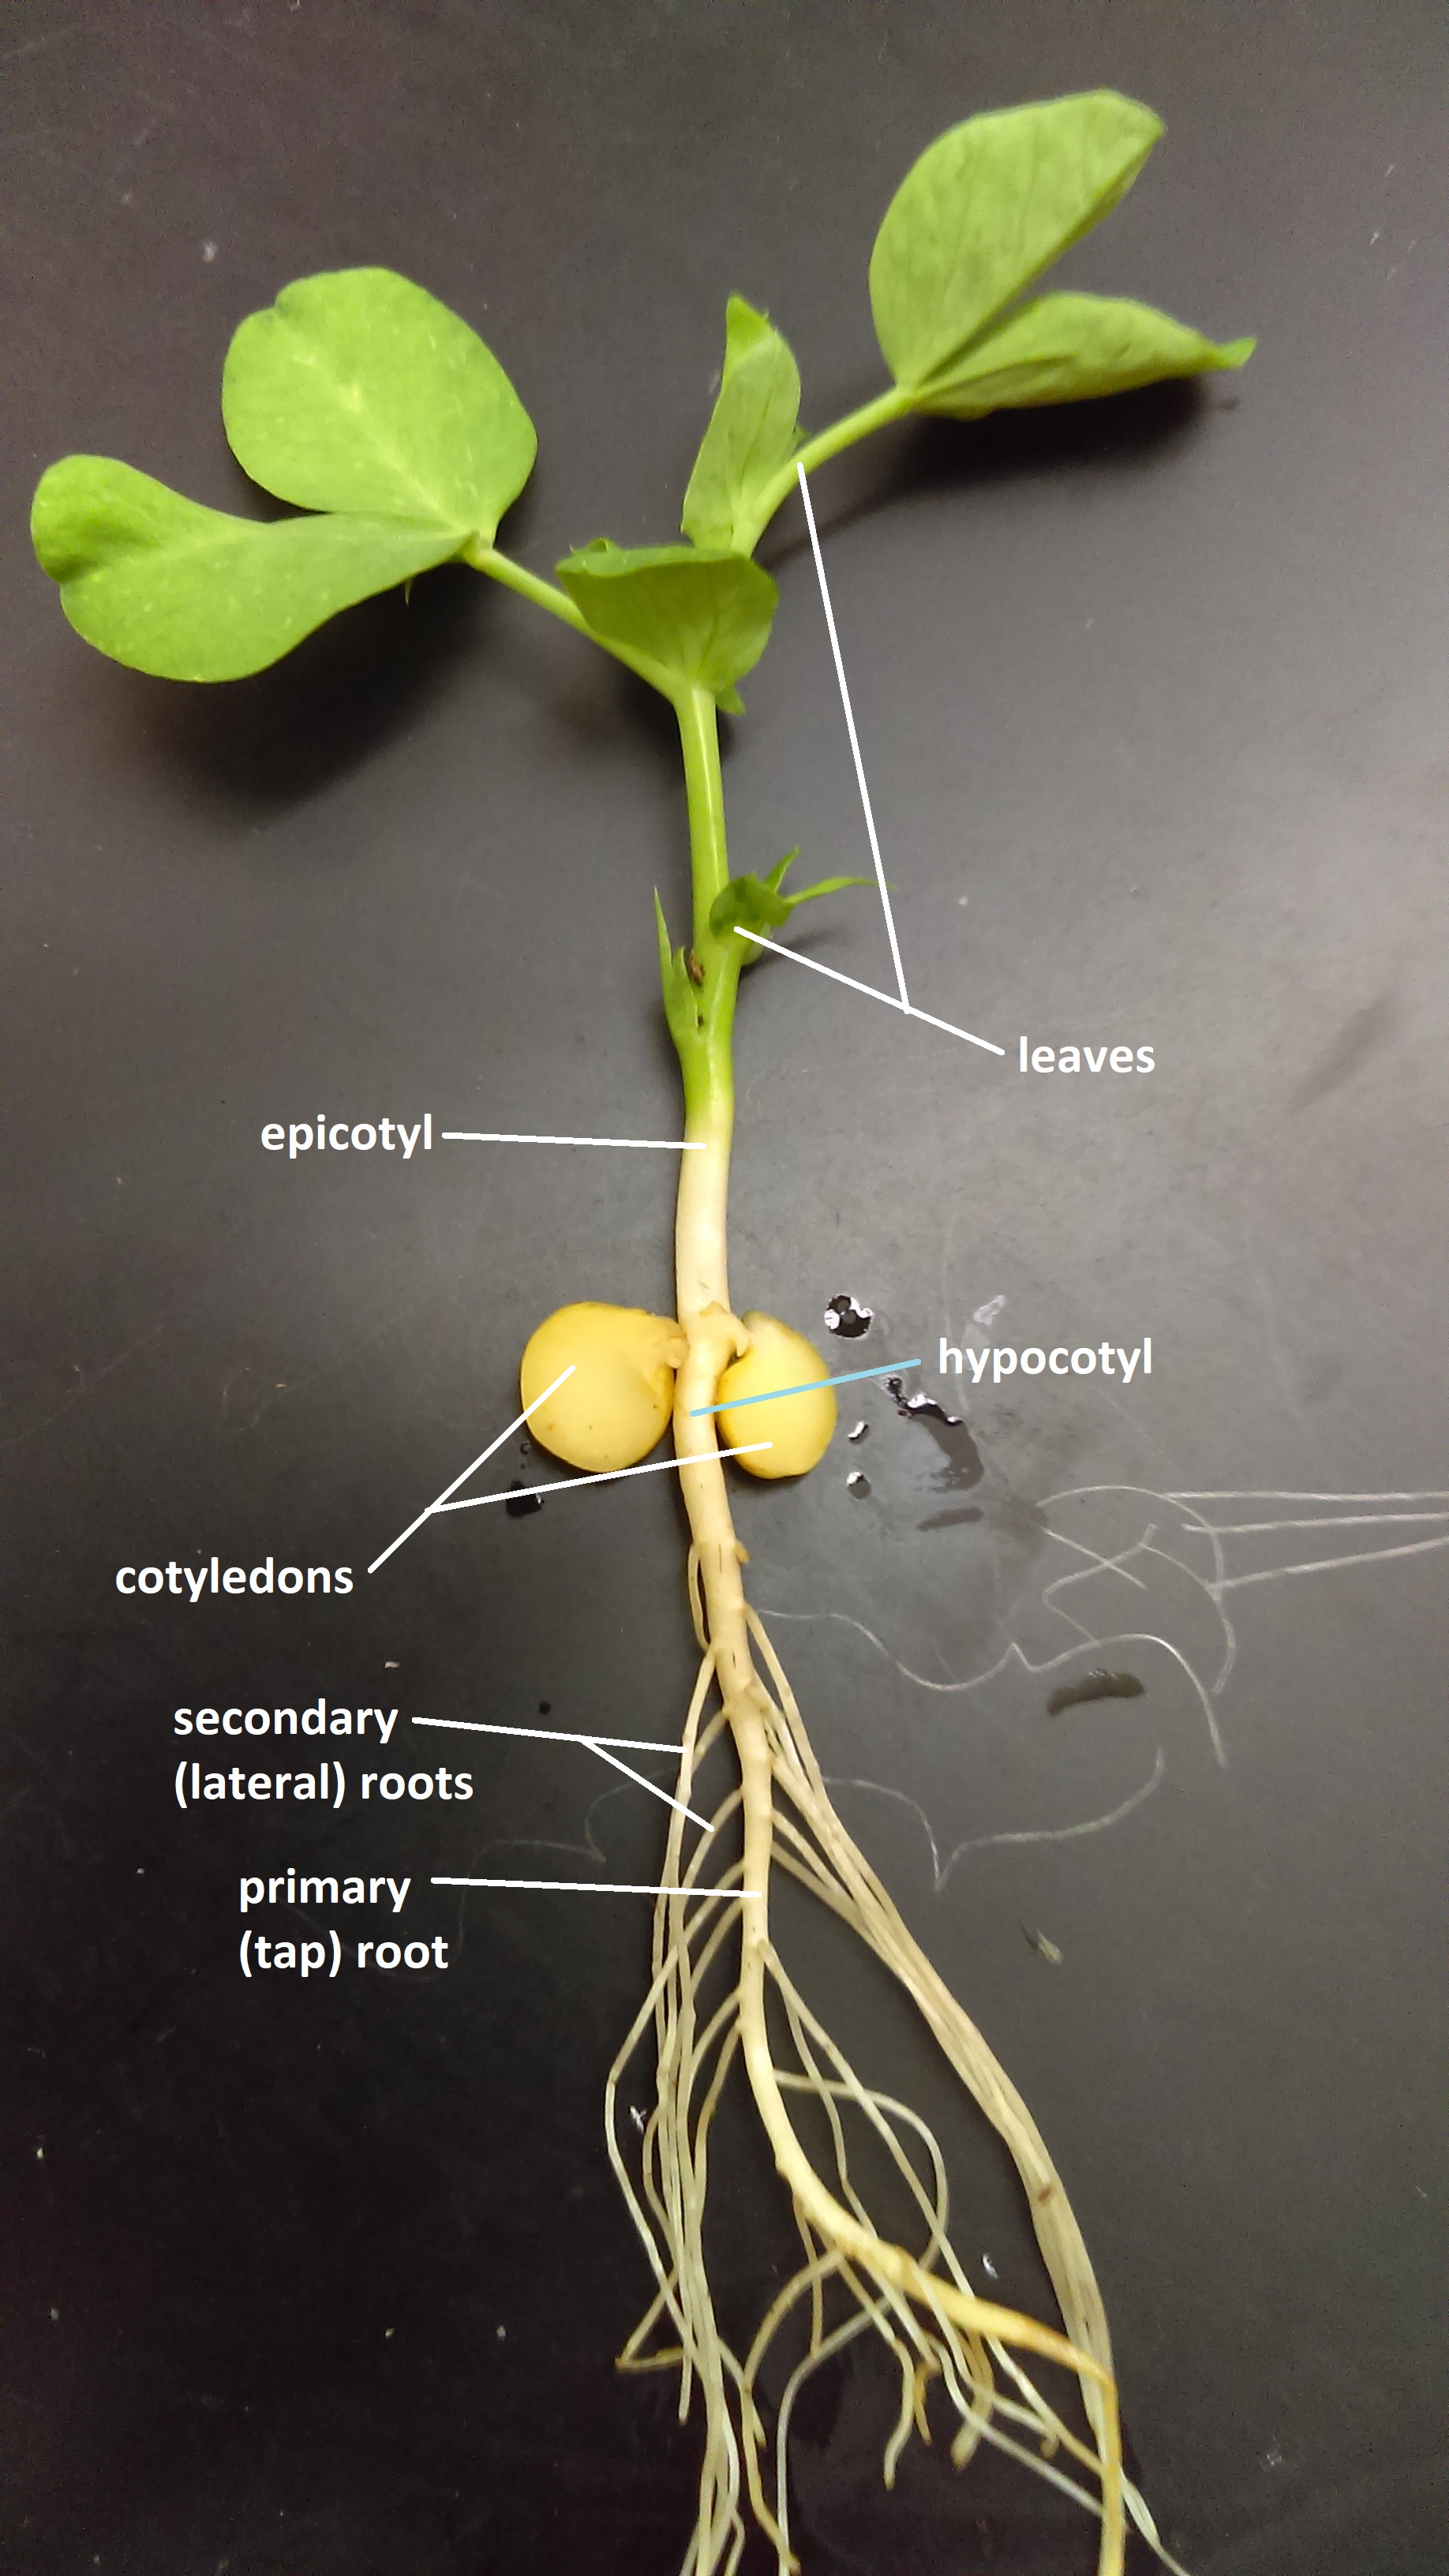 A pea seedling. The yellow cotyledons remained below ground. The epicotyl elongated, and leaves develop at the top.